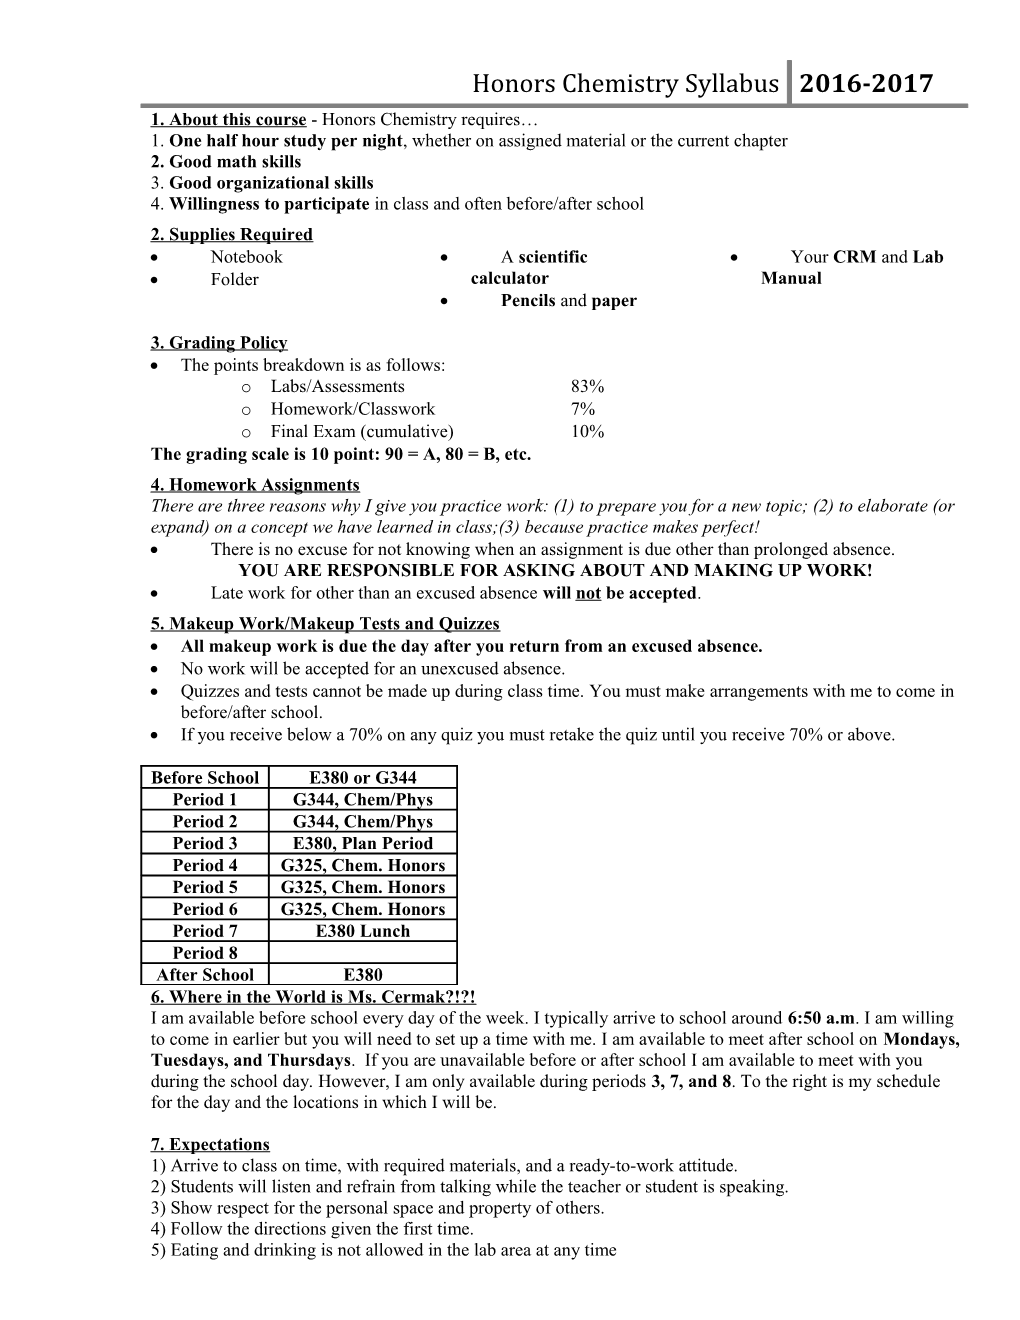 Honors Chemistry Information Sheet